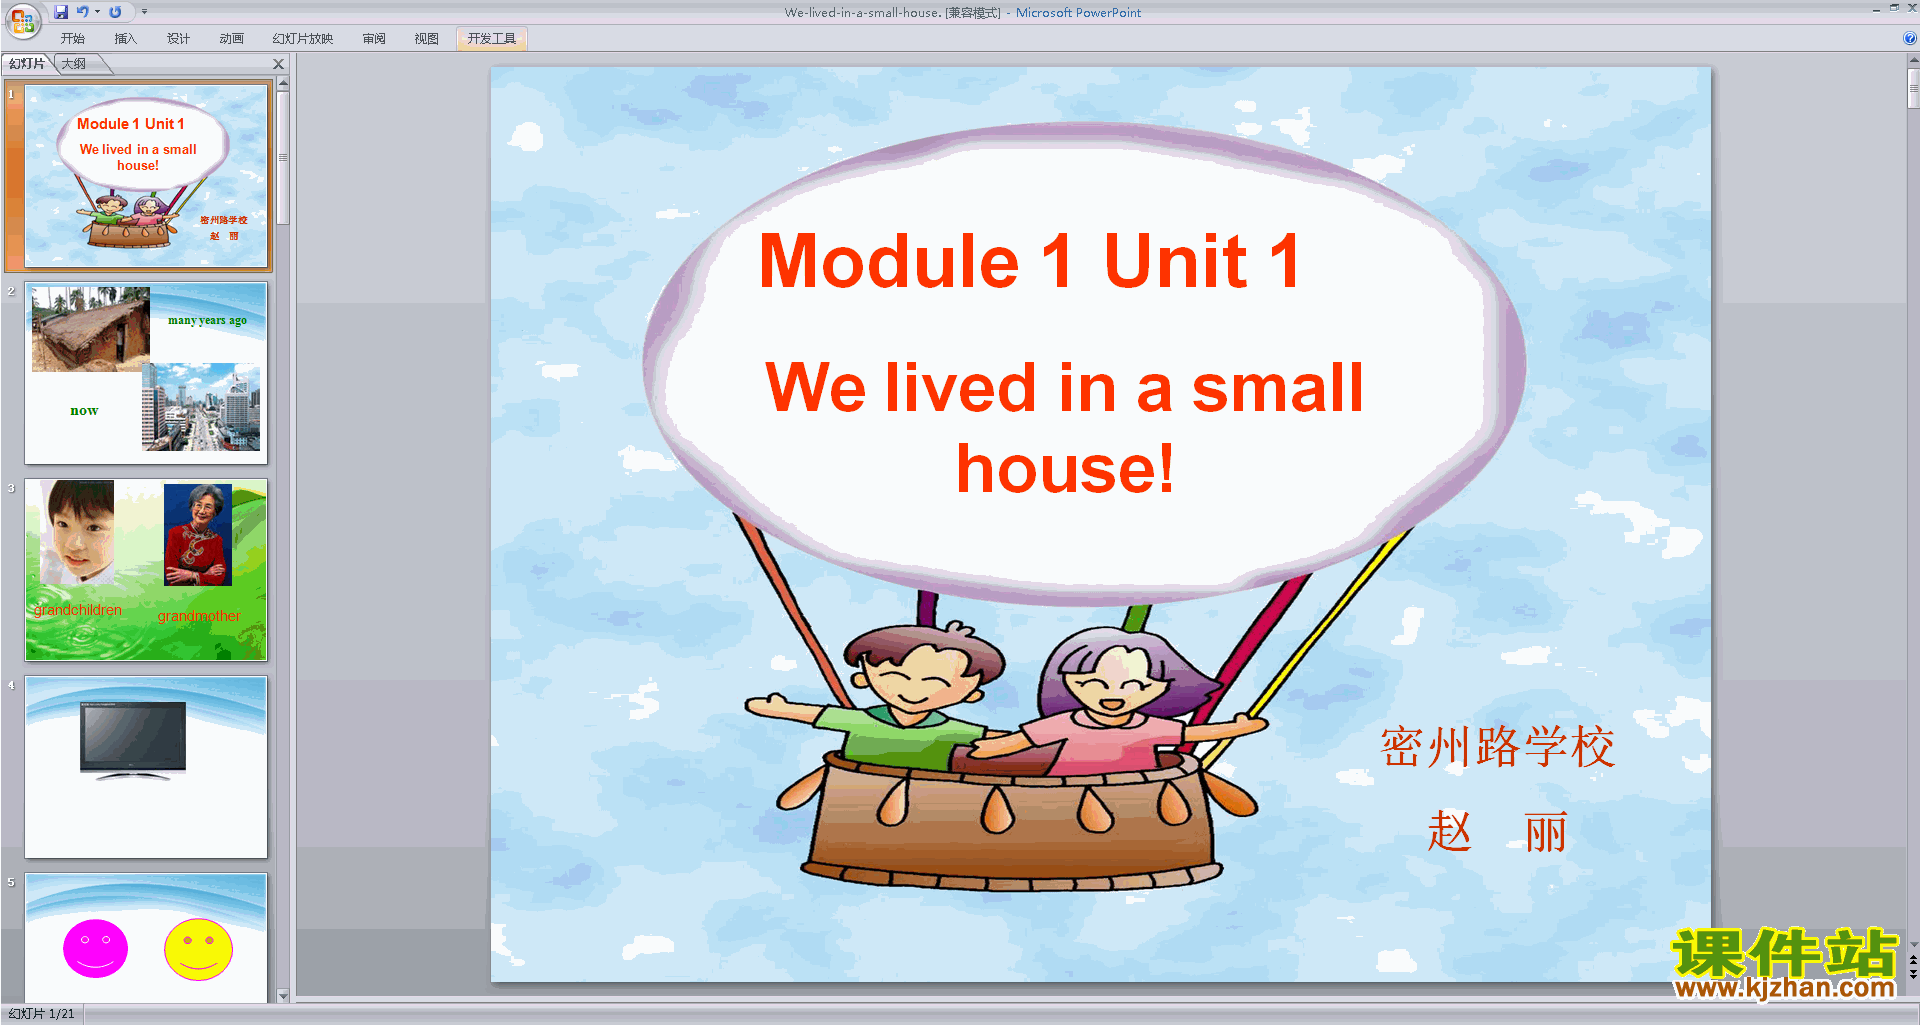 аModule1 Unit1 We lived in a small housepptμ